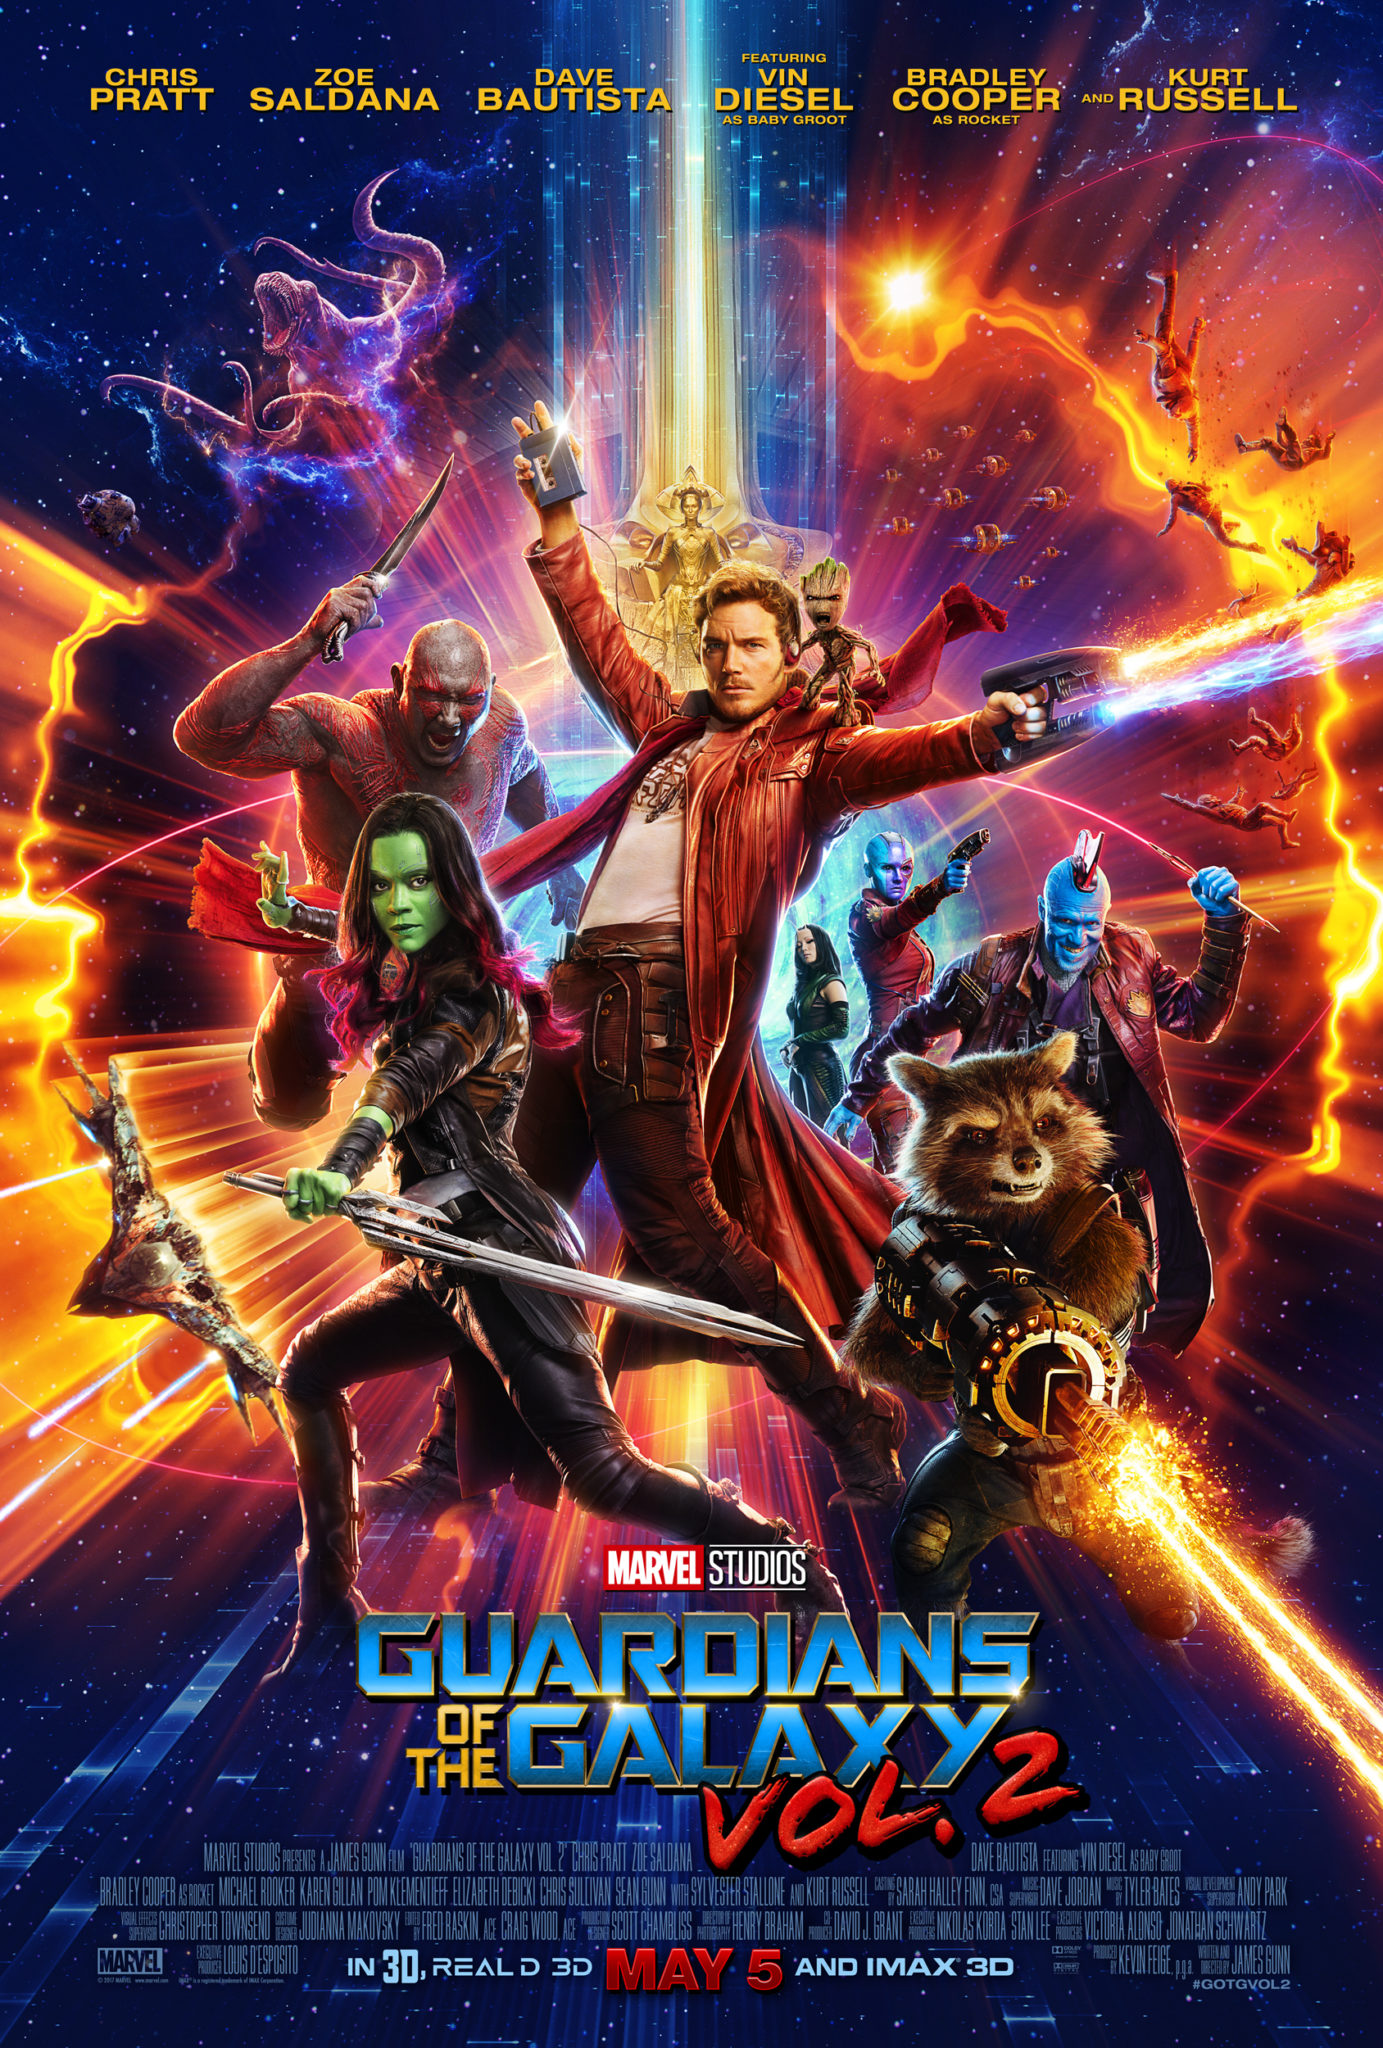 “Guardians Of The Galaxy Vol 2” Newest Poster And Trailer Released